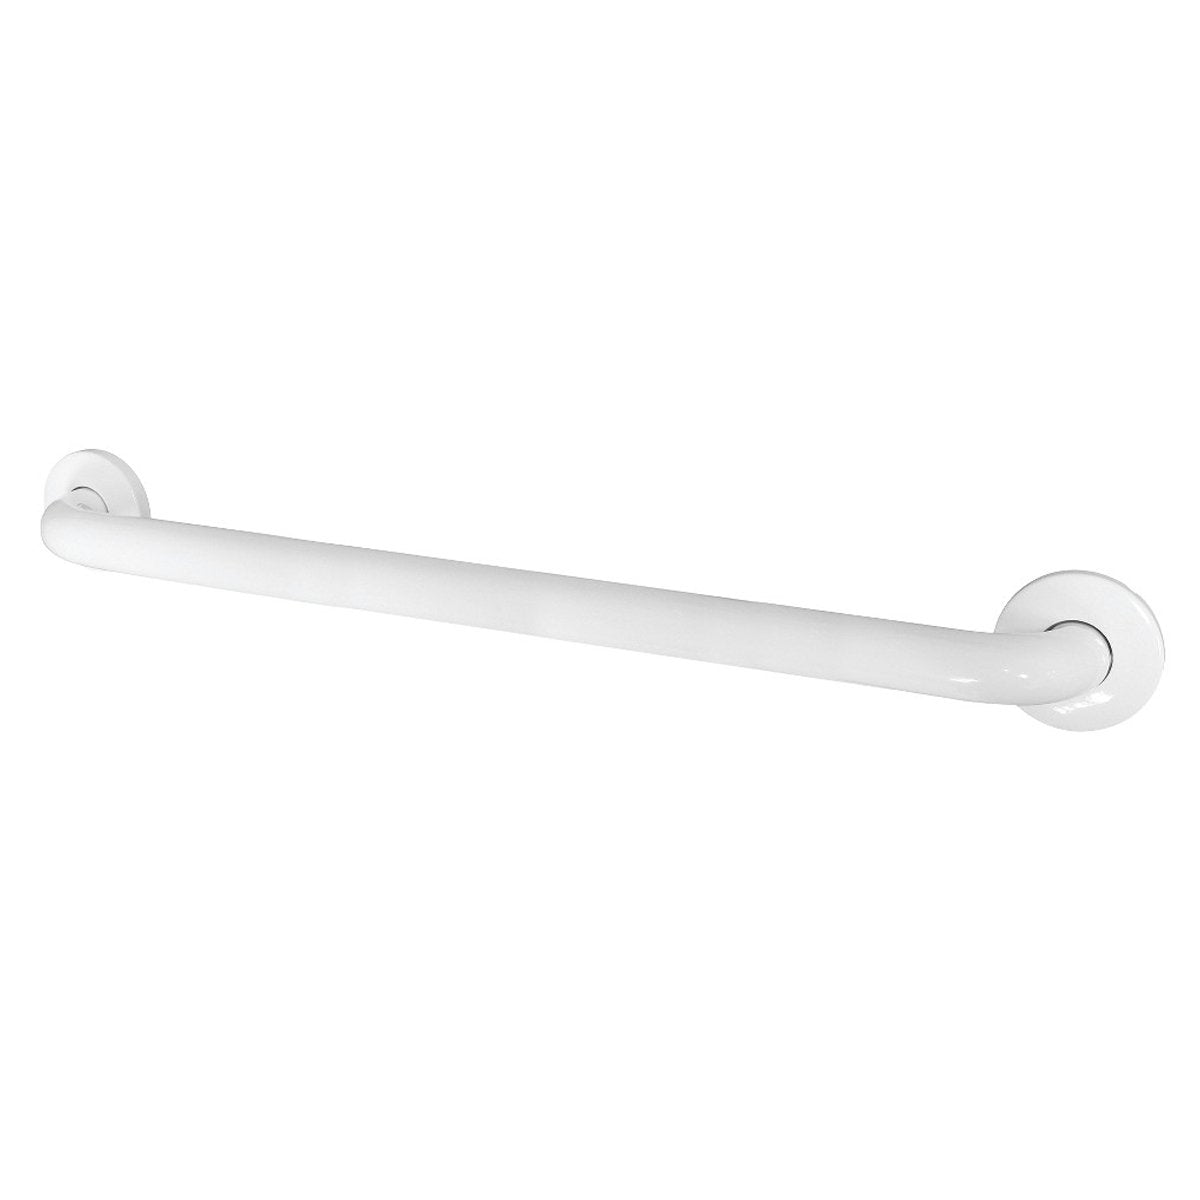 Kingston Brass Made To Match Stainless Steel Grab Bar in White